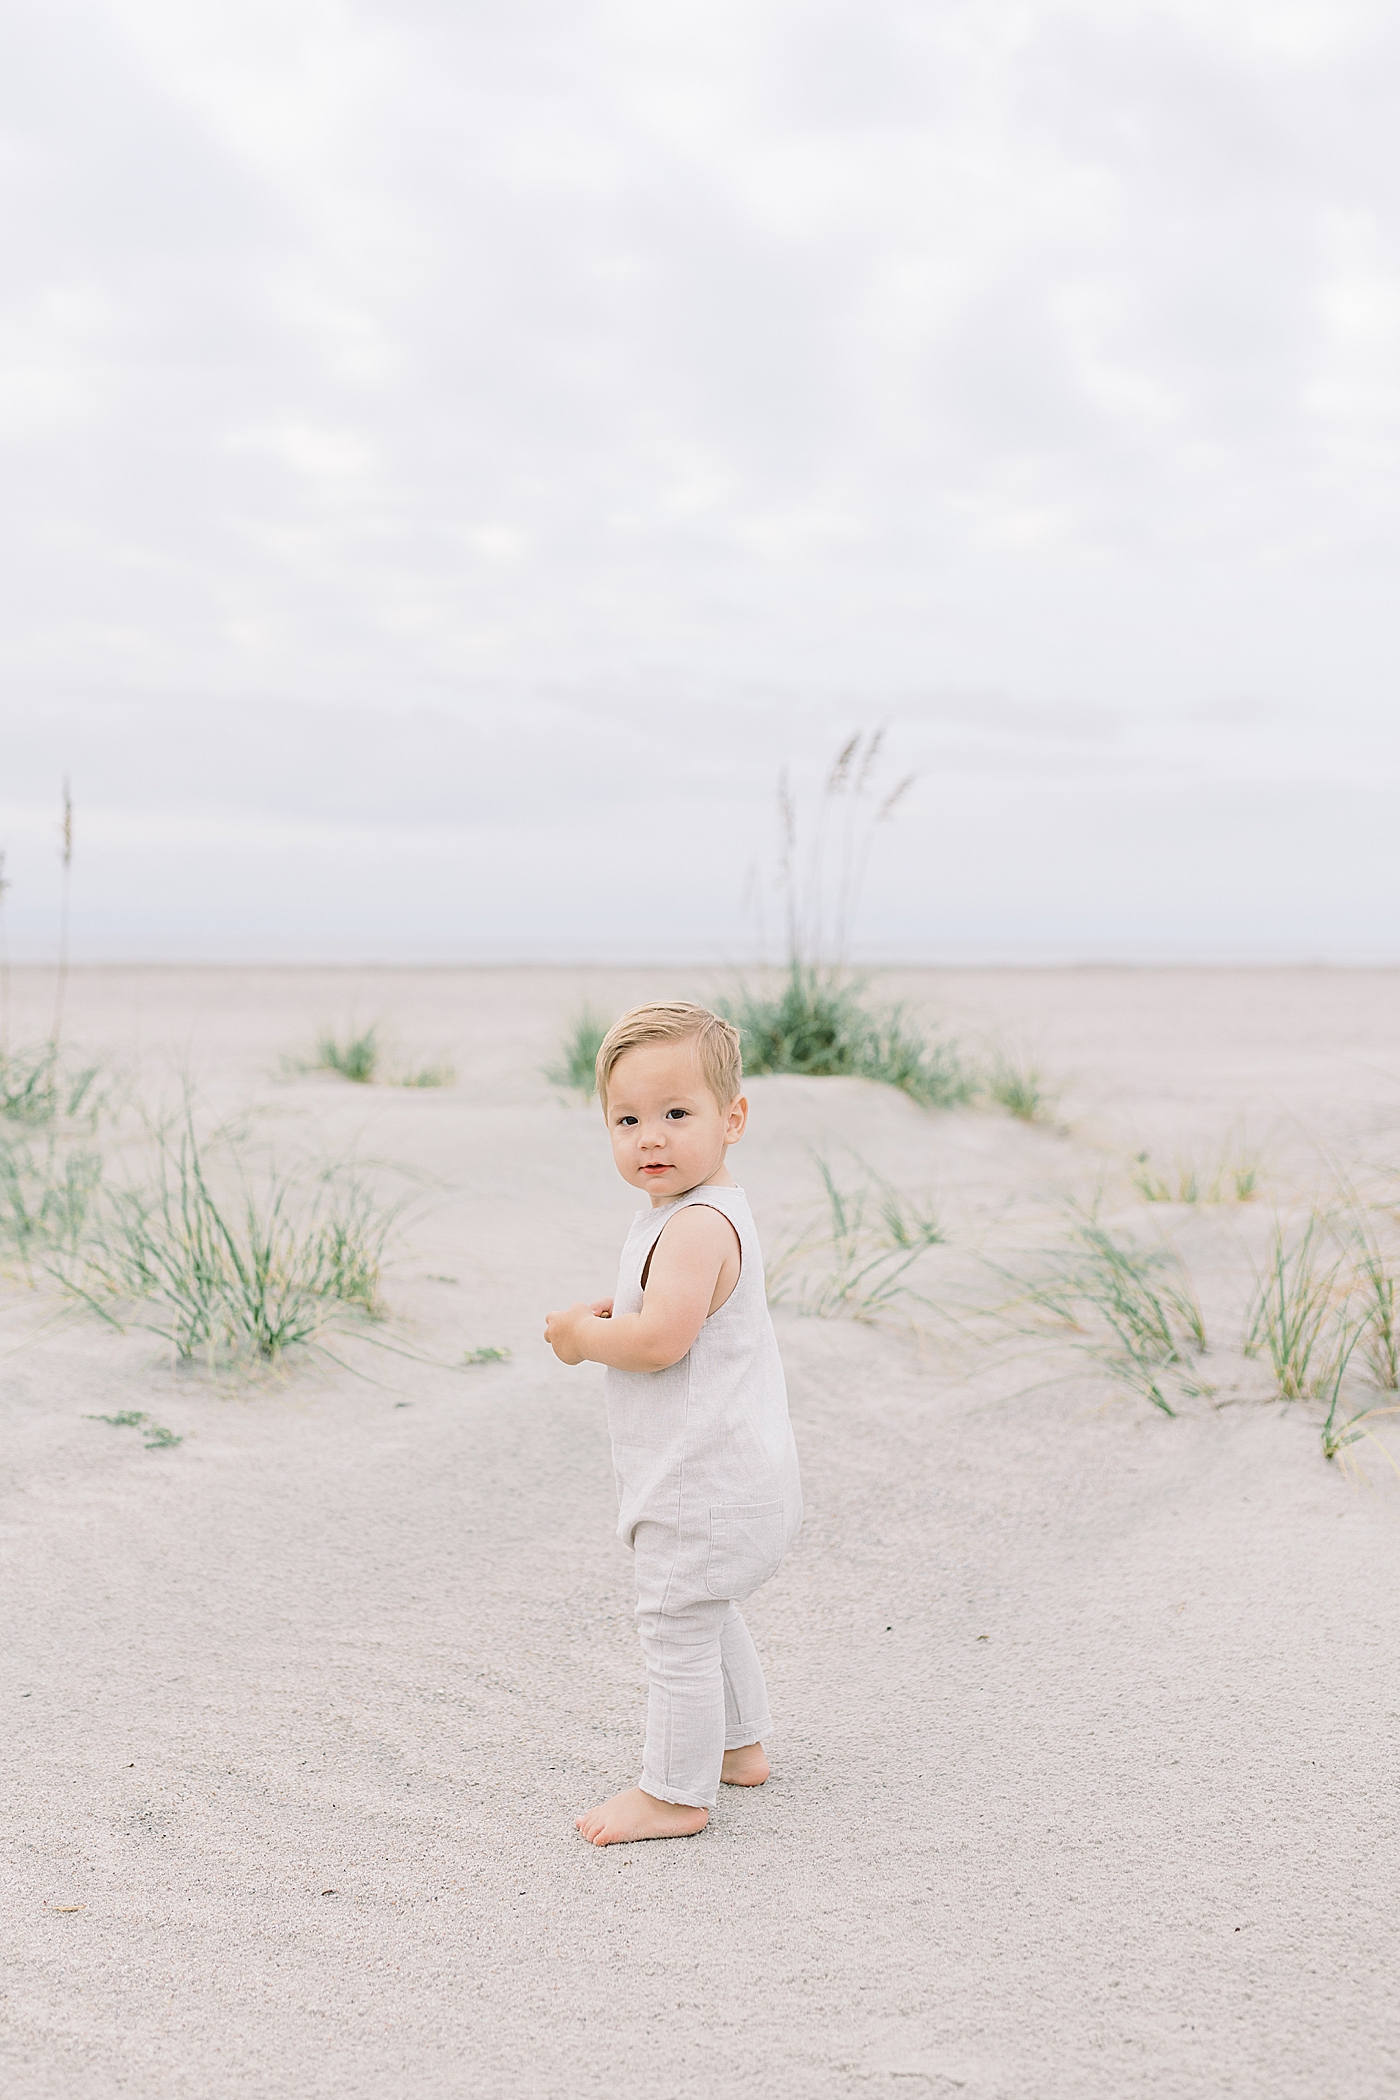 Baby in a jumper walking on the beach | Image by Caitlyn Motycka